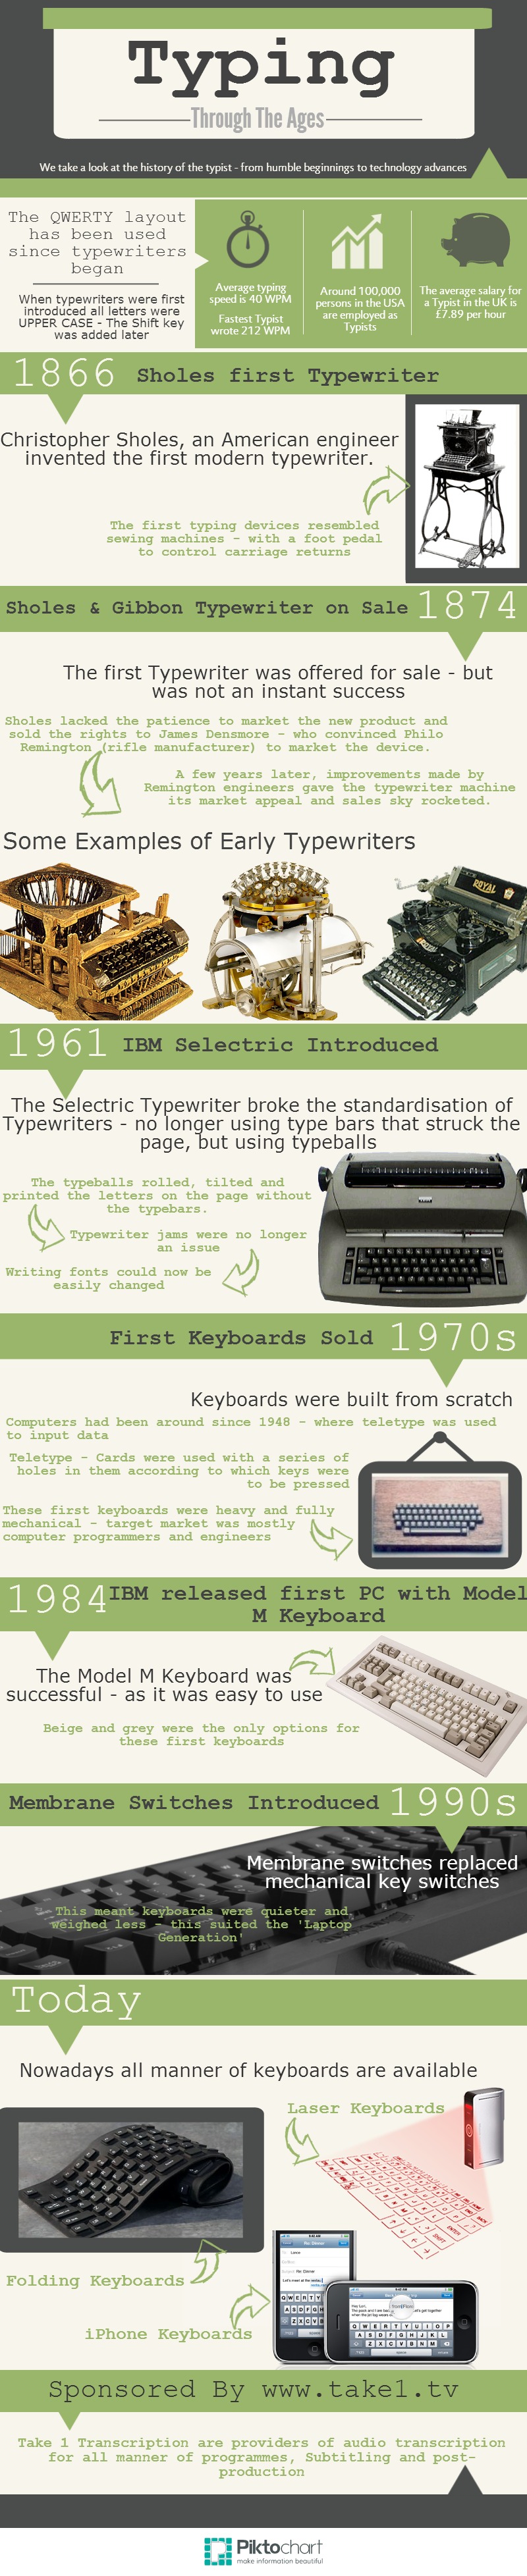 Typing Through the Ages